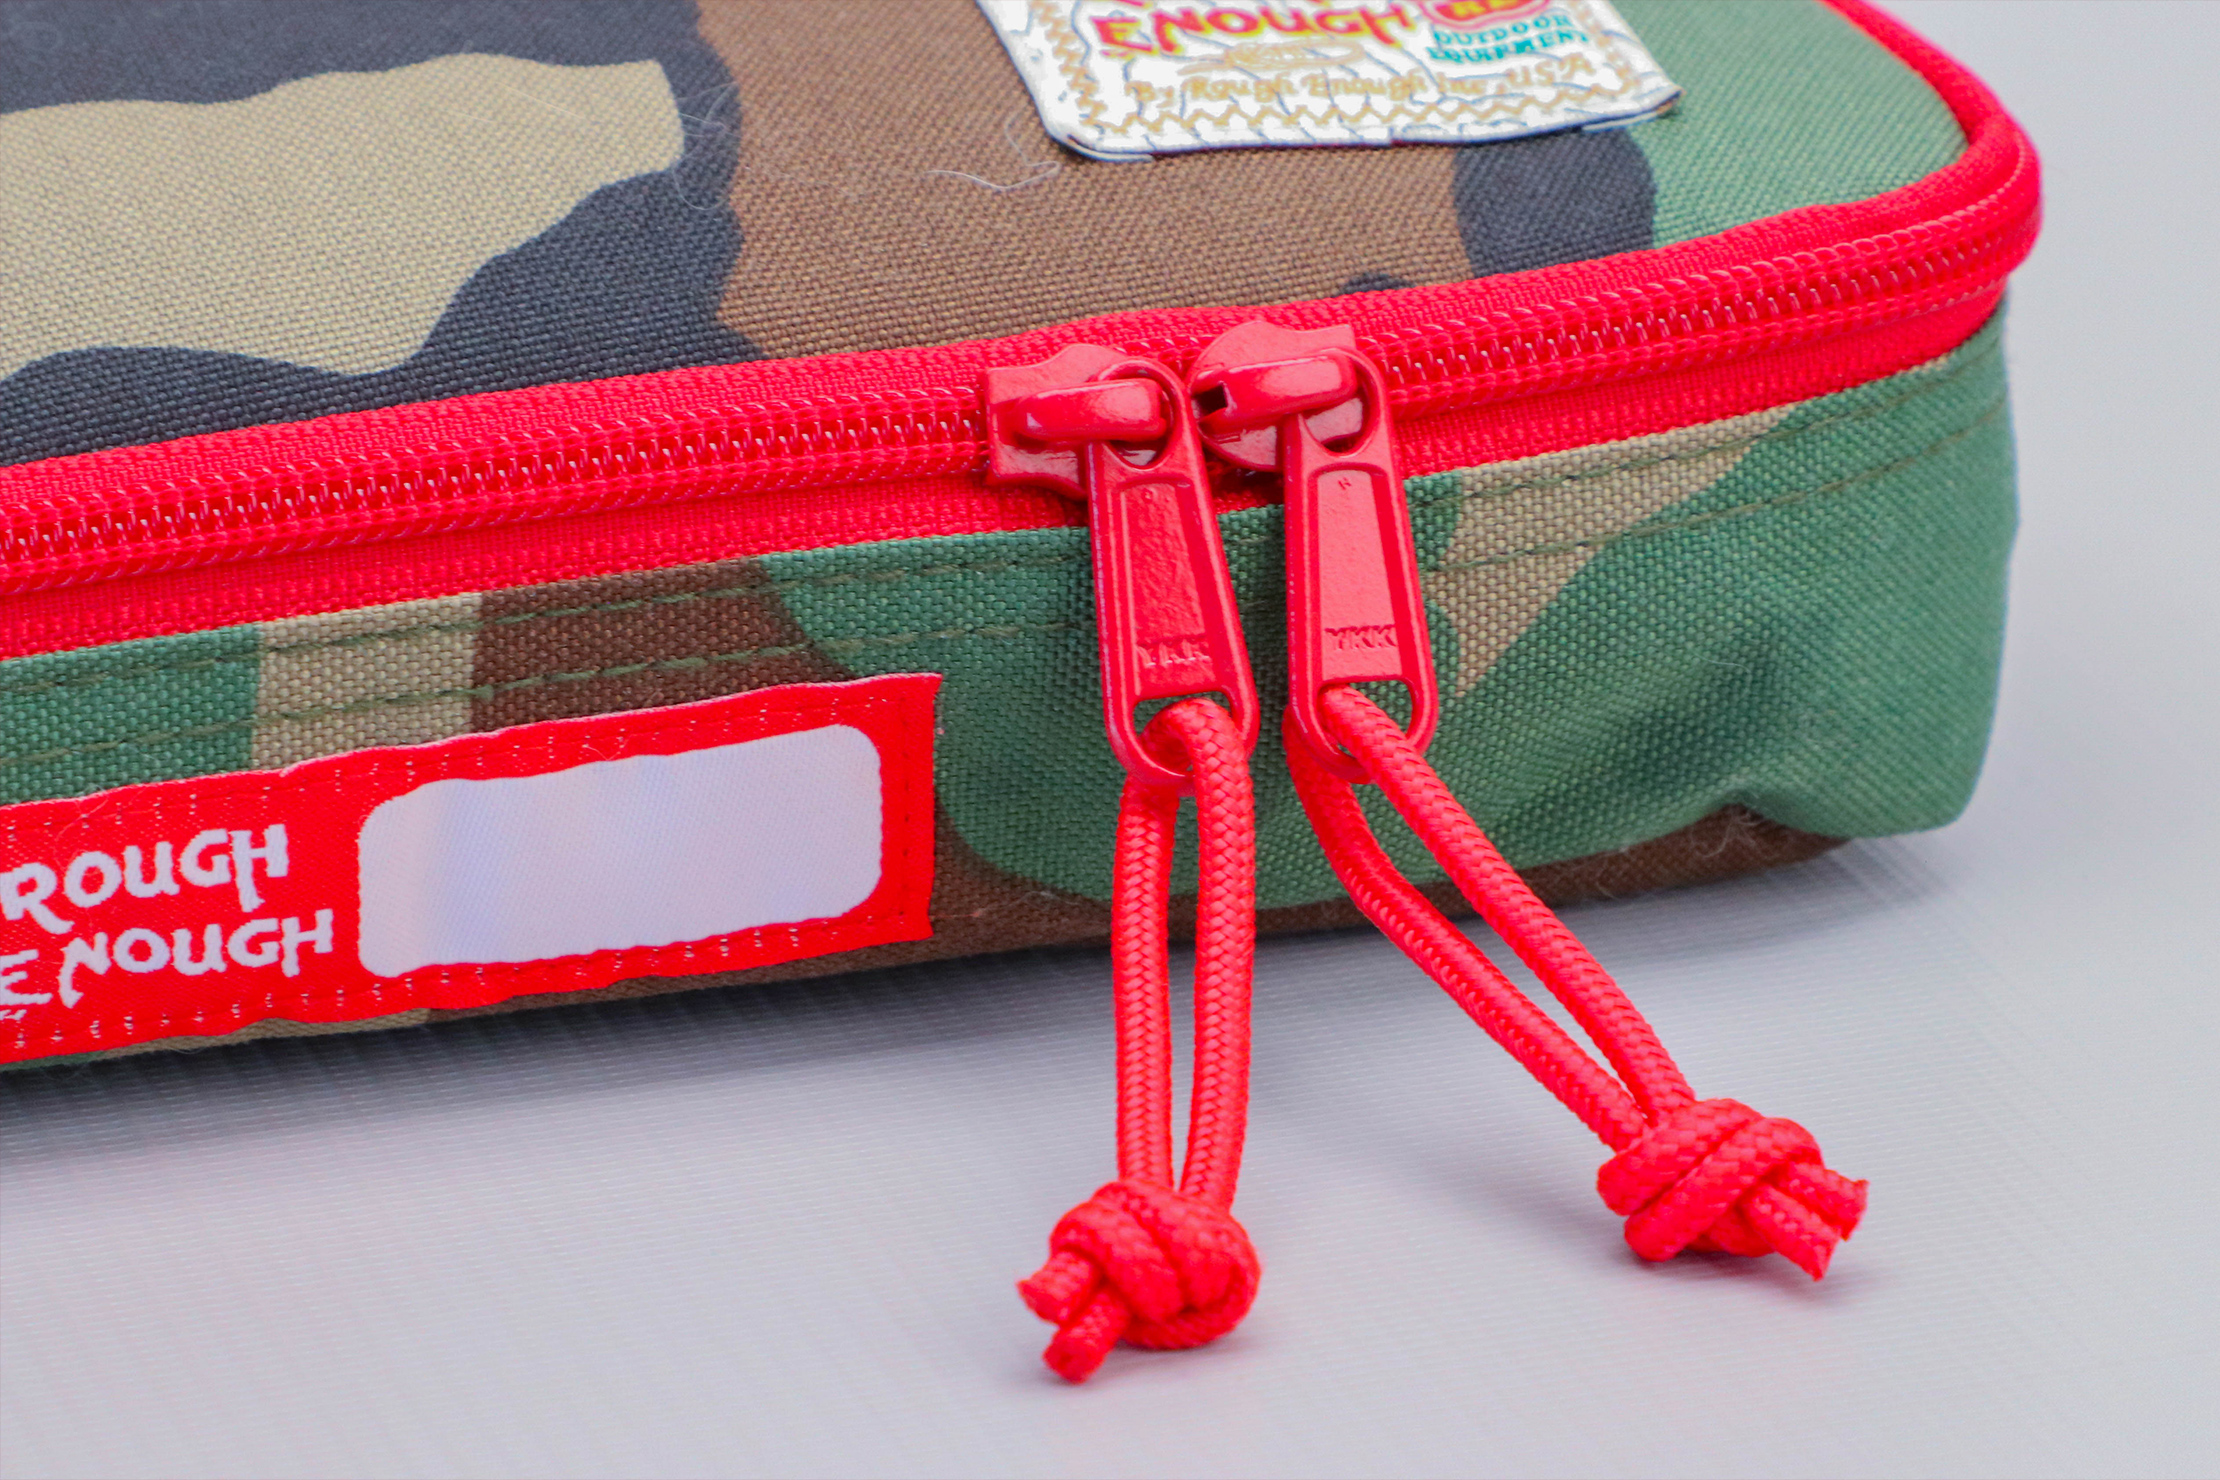 Rough Enough Small Tool Bag Pouch zippers